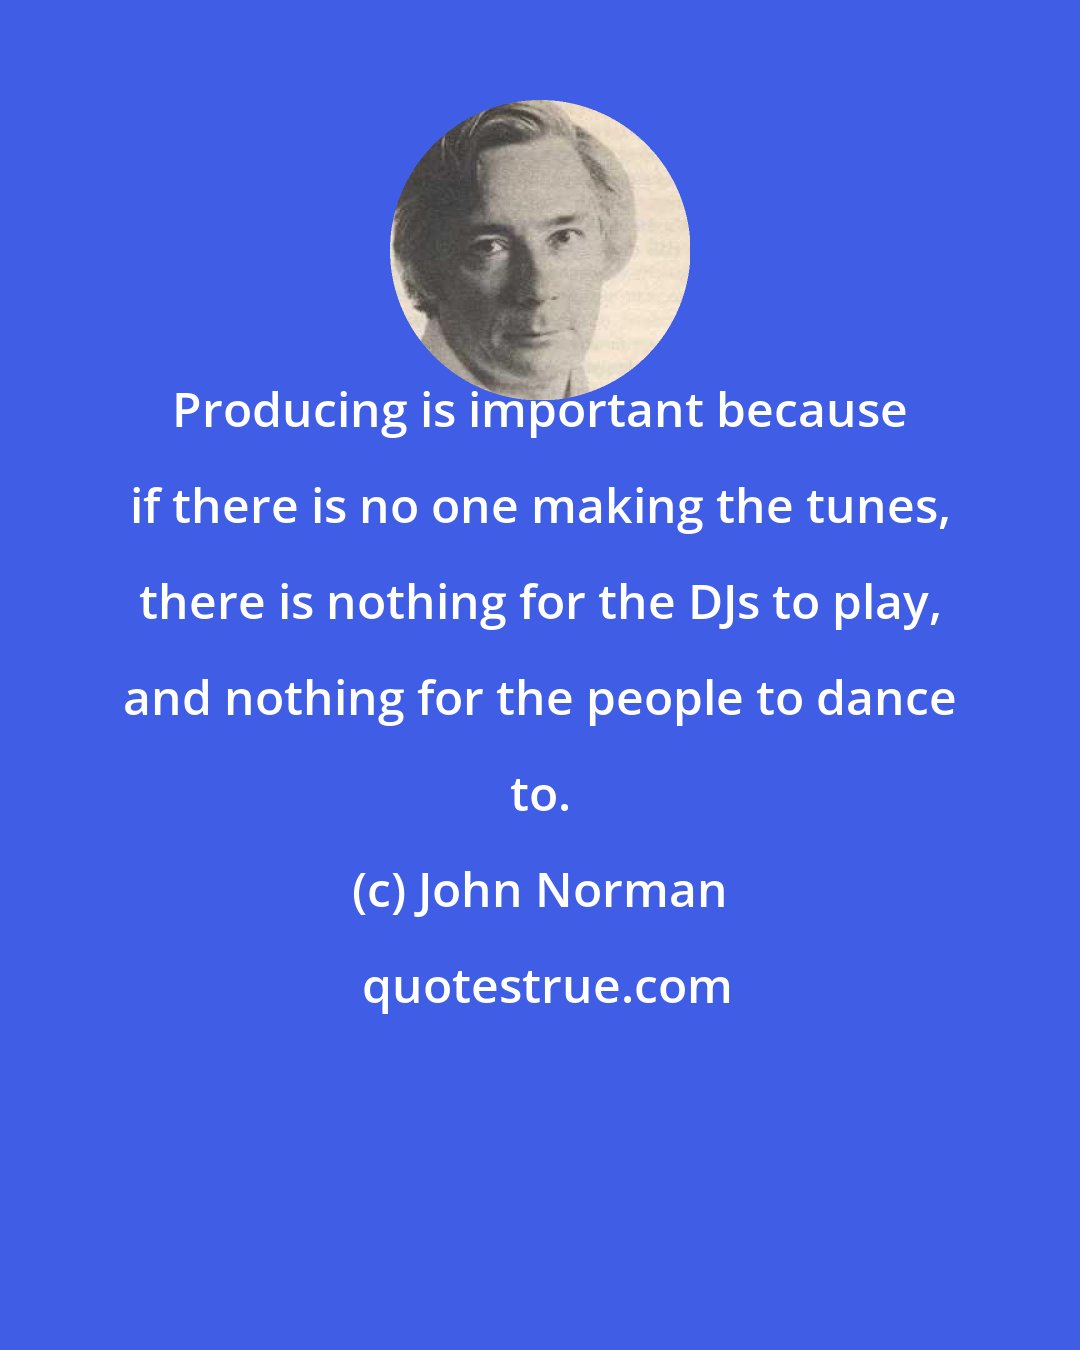 John Norman: Producing is important because if there is no one making the tunes, there is nothing for the DJs to play, and nothing for the people to dance to.